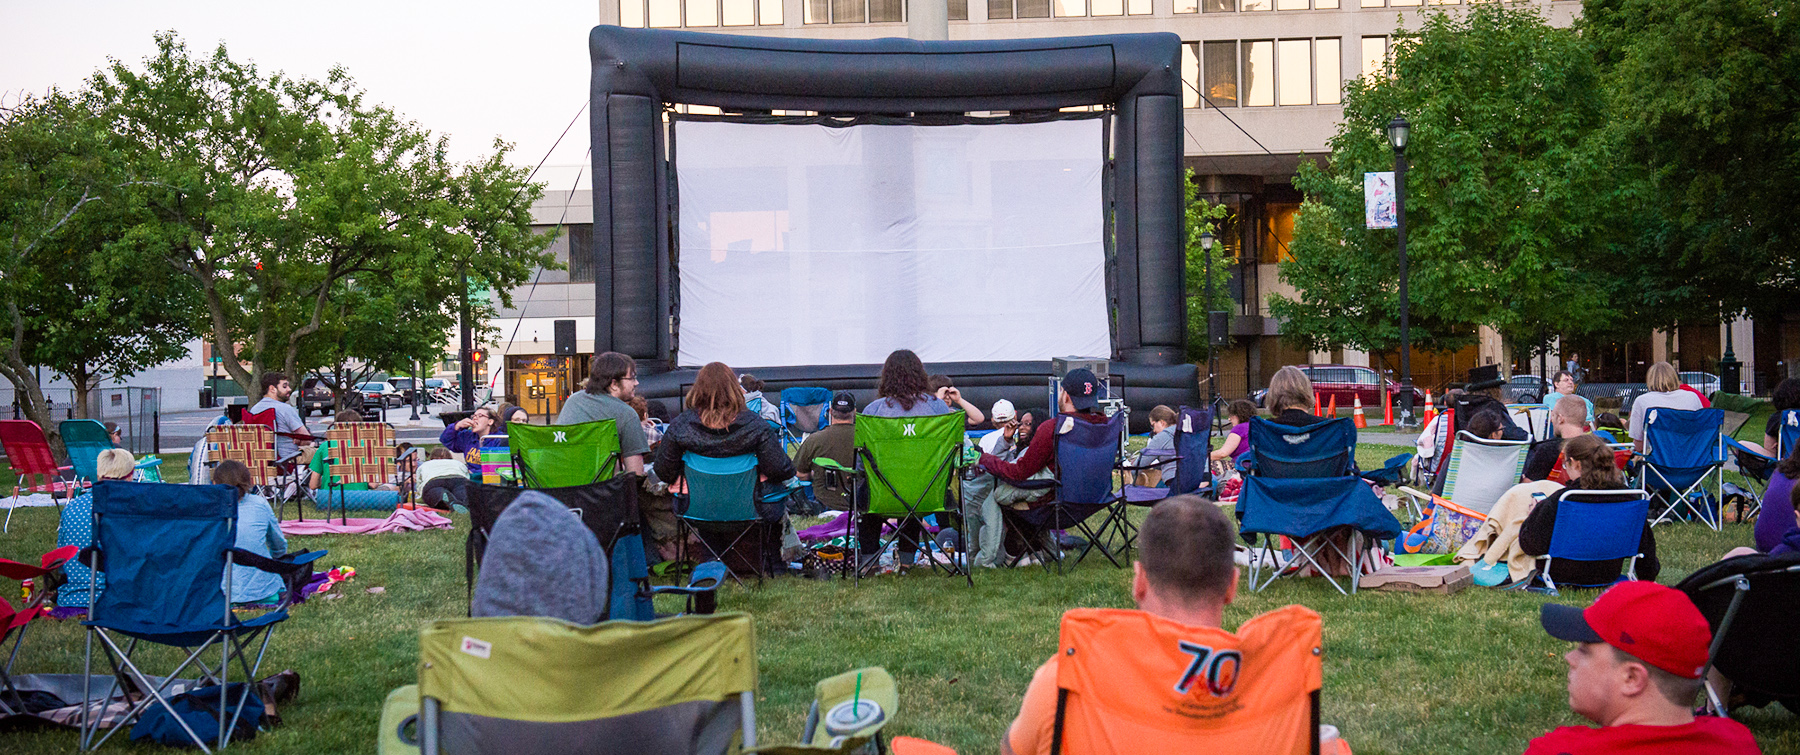 Movies on the Common